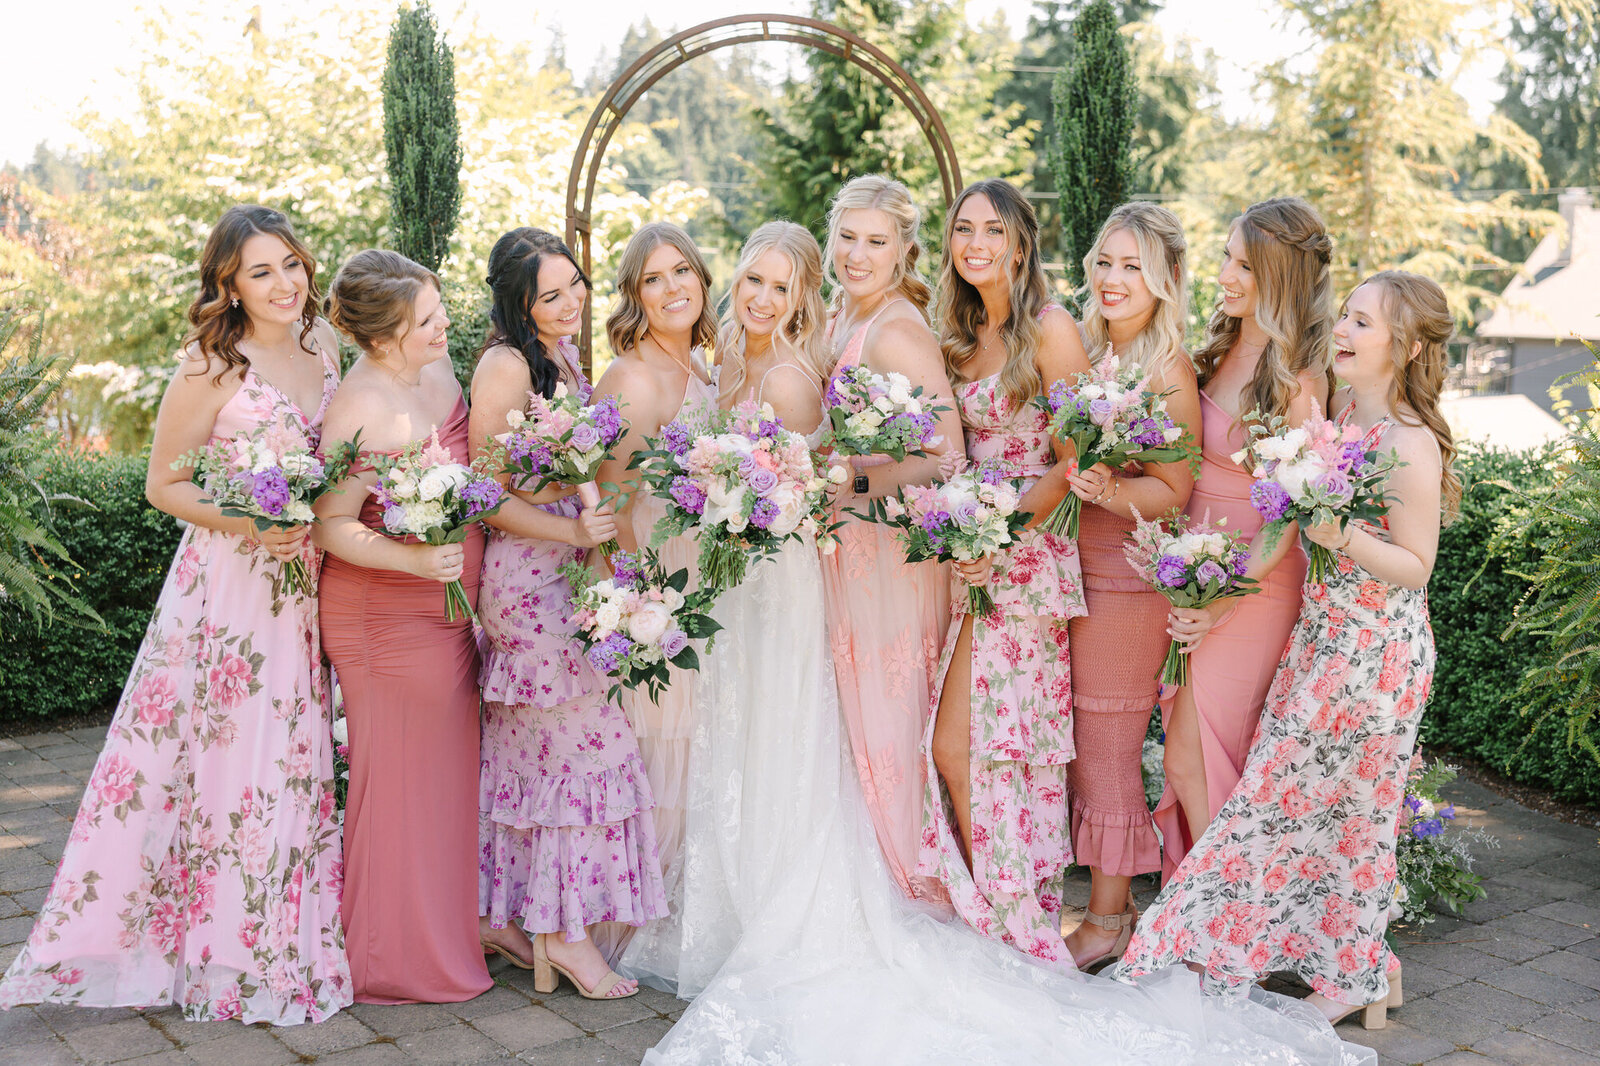 Bridesmaids in floral dresses standing together in a garden in oklahoma city